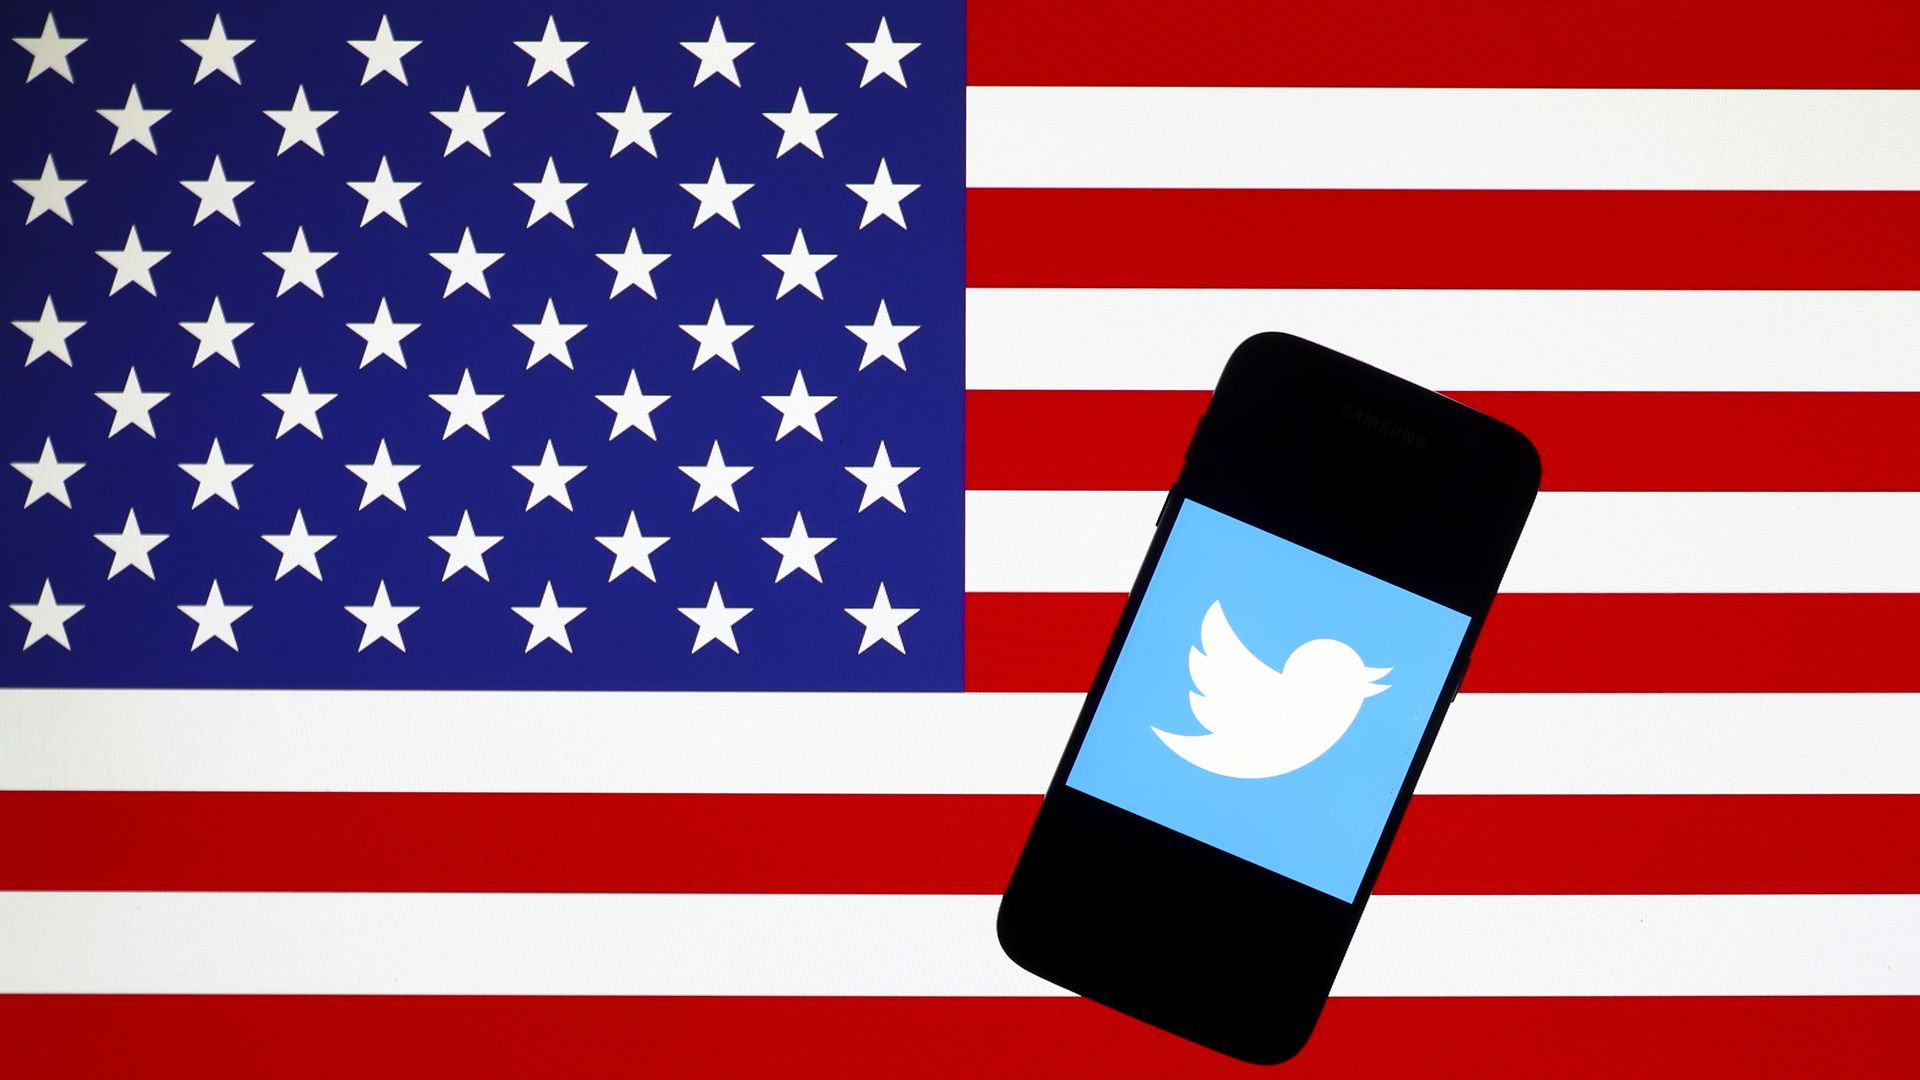 A phone displaying the Twitter logo appears atop the American flag